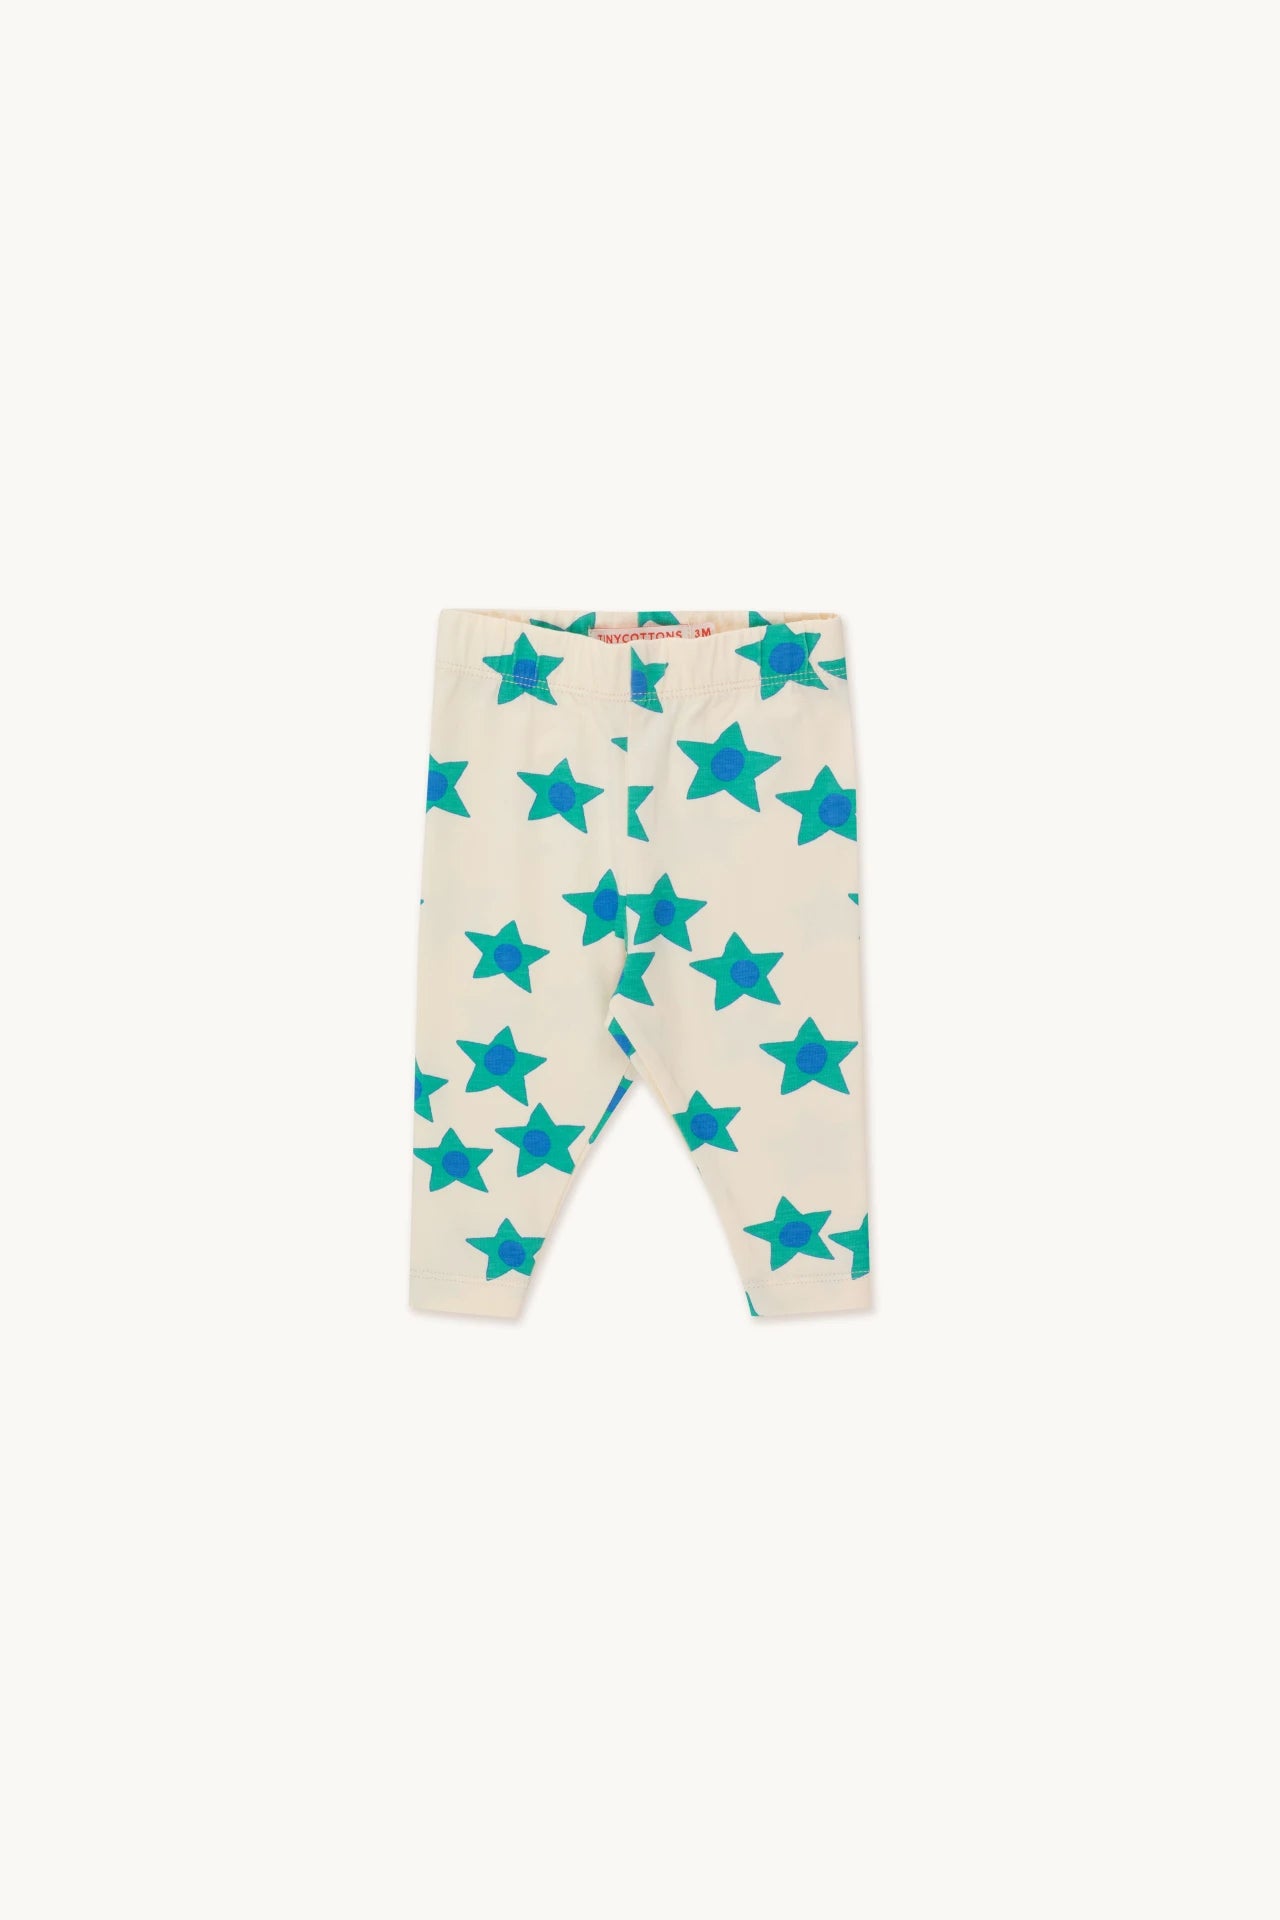 Tiny cottons starflowers baby pants SS24-032-103